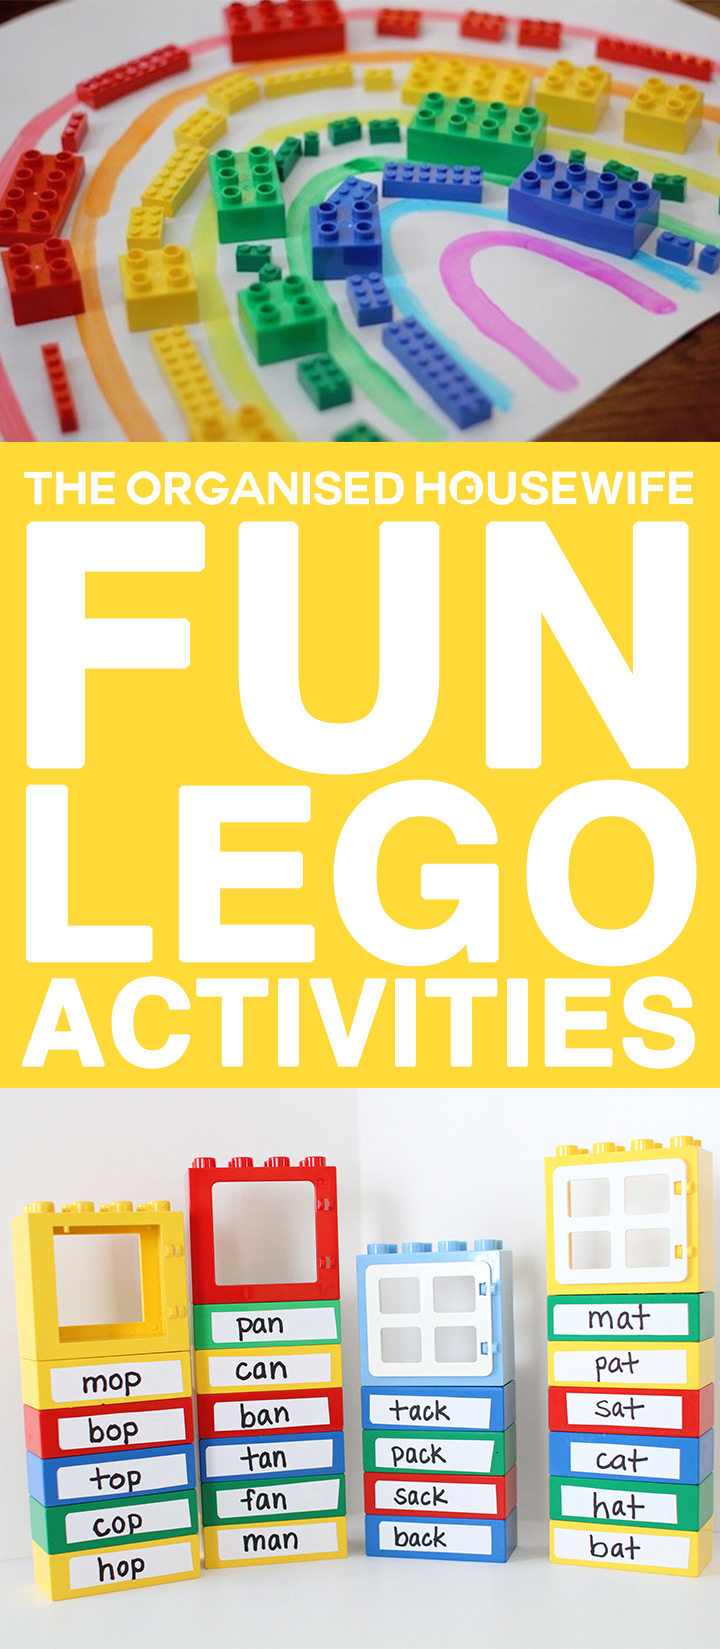 Lego wlll not only does it occupy them for hours on end, but it is also a good way for them to let their imaginations run wild, develop problem-solving skills and enhance their spatial abilities. Here is a collection of some Lego activities that will suit a variety of ages. Your kids will love to build these and you can join in too!